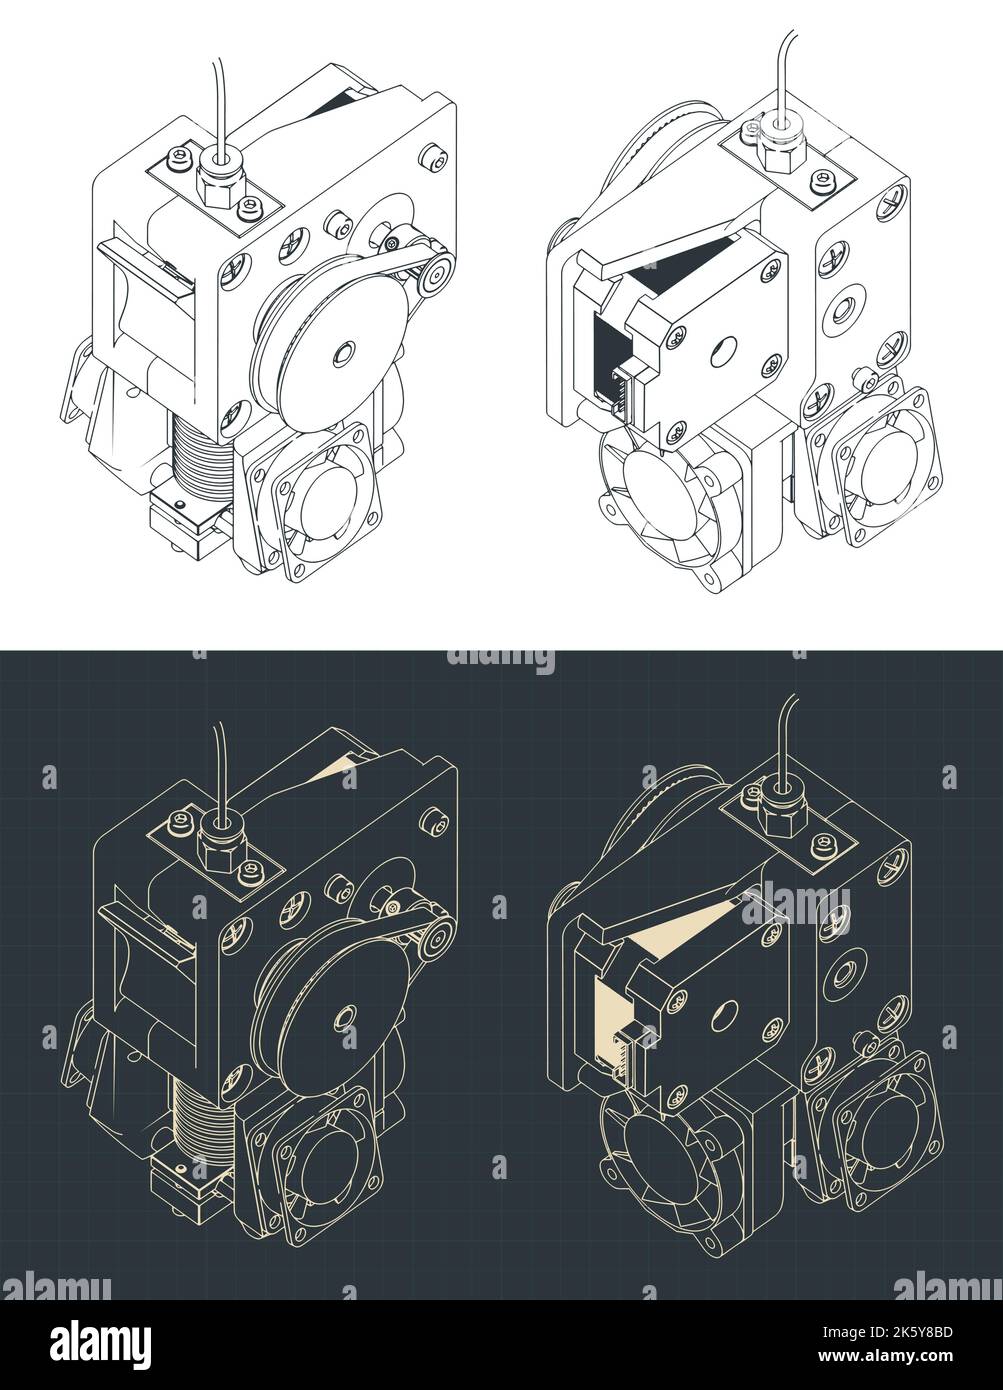 Stylized vector illustrations of isometric blueprints of 3d printer extruder Stock Vector